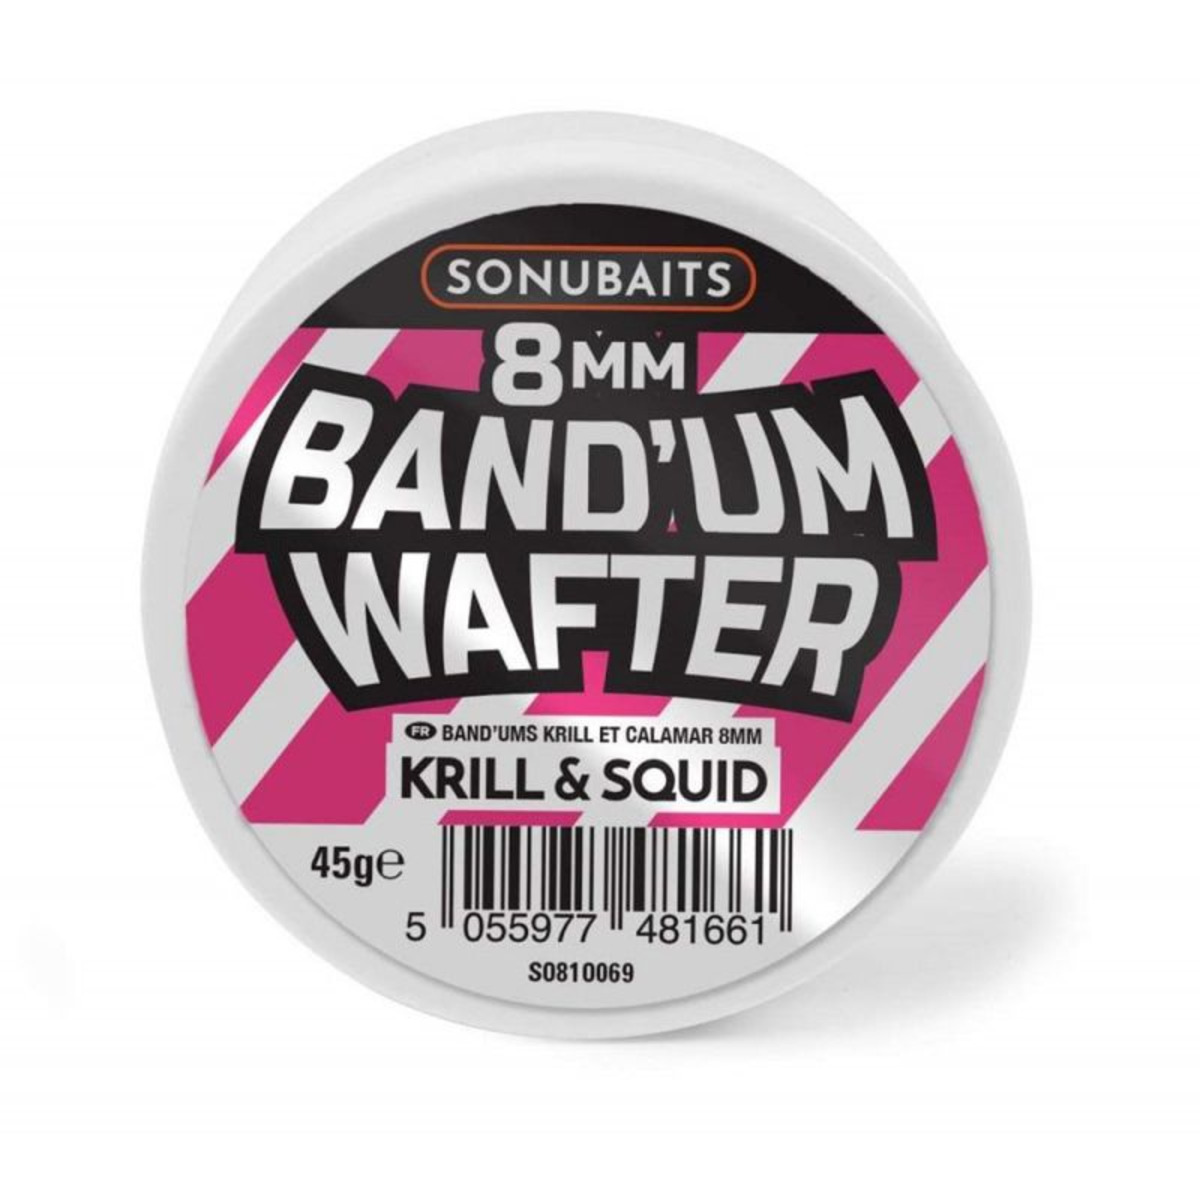 Sonubaits Band’um Wafters - 8 mm - Krill and Squid